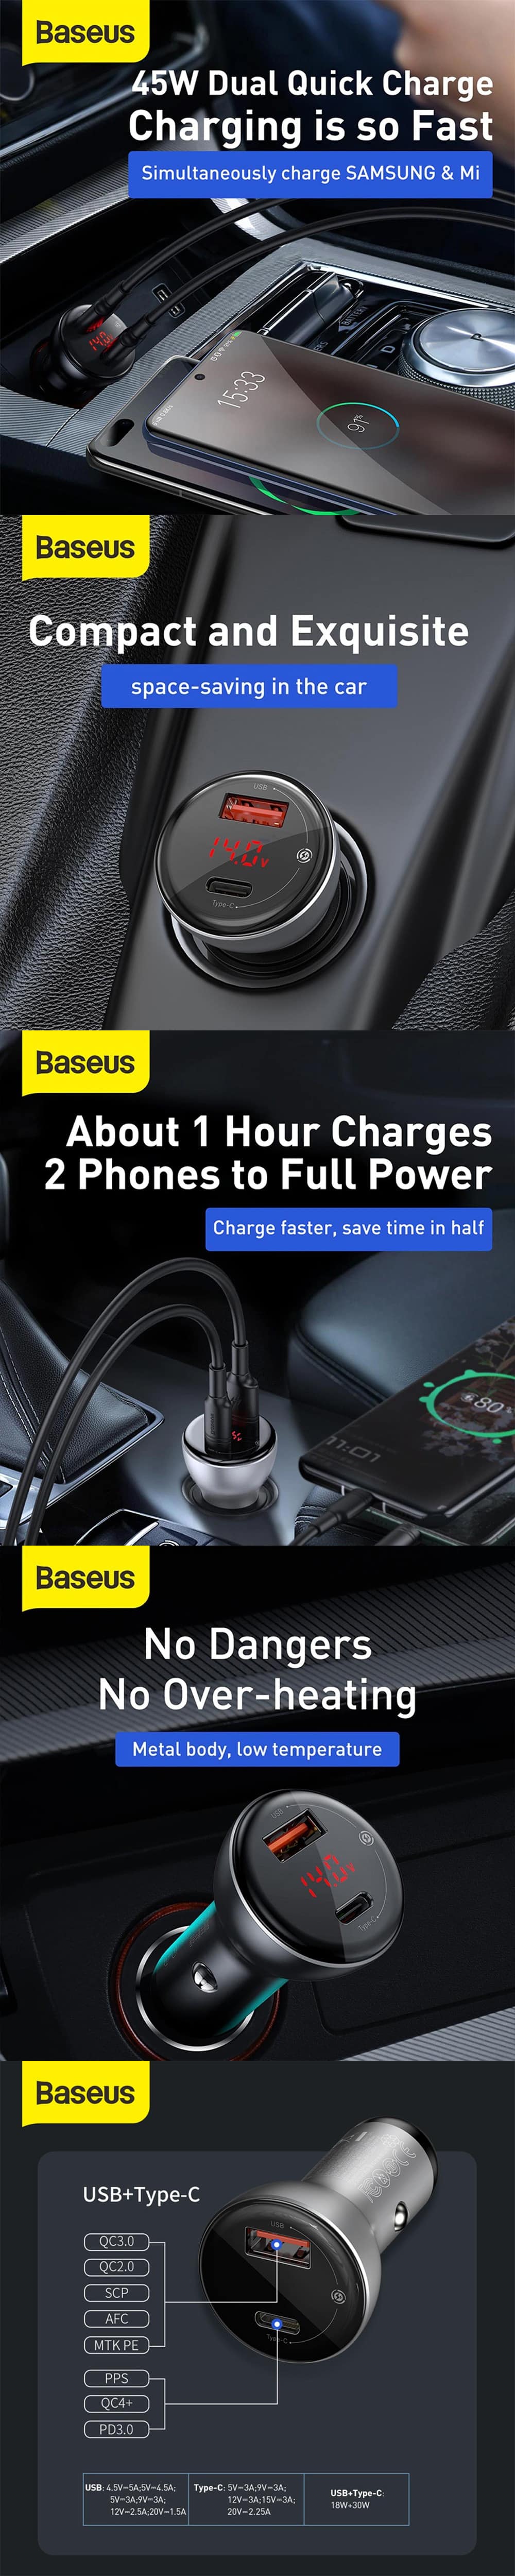 Baseus Digital Display PPS Dual Quick Charging Car Charger 45W CCBX C0G Black 4